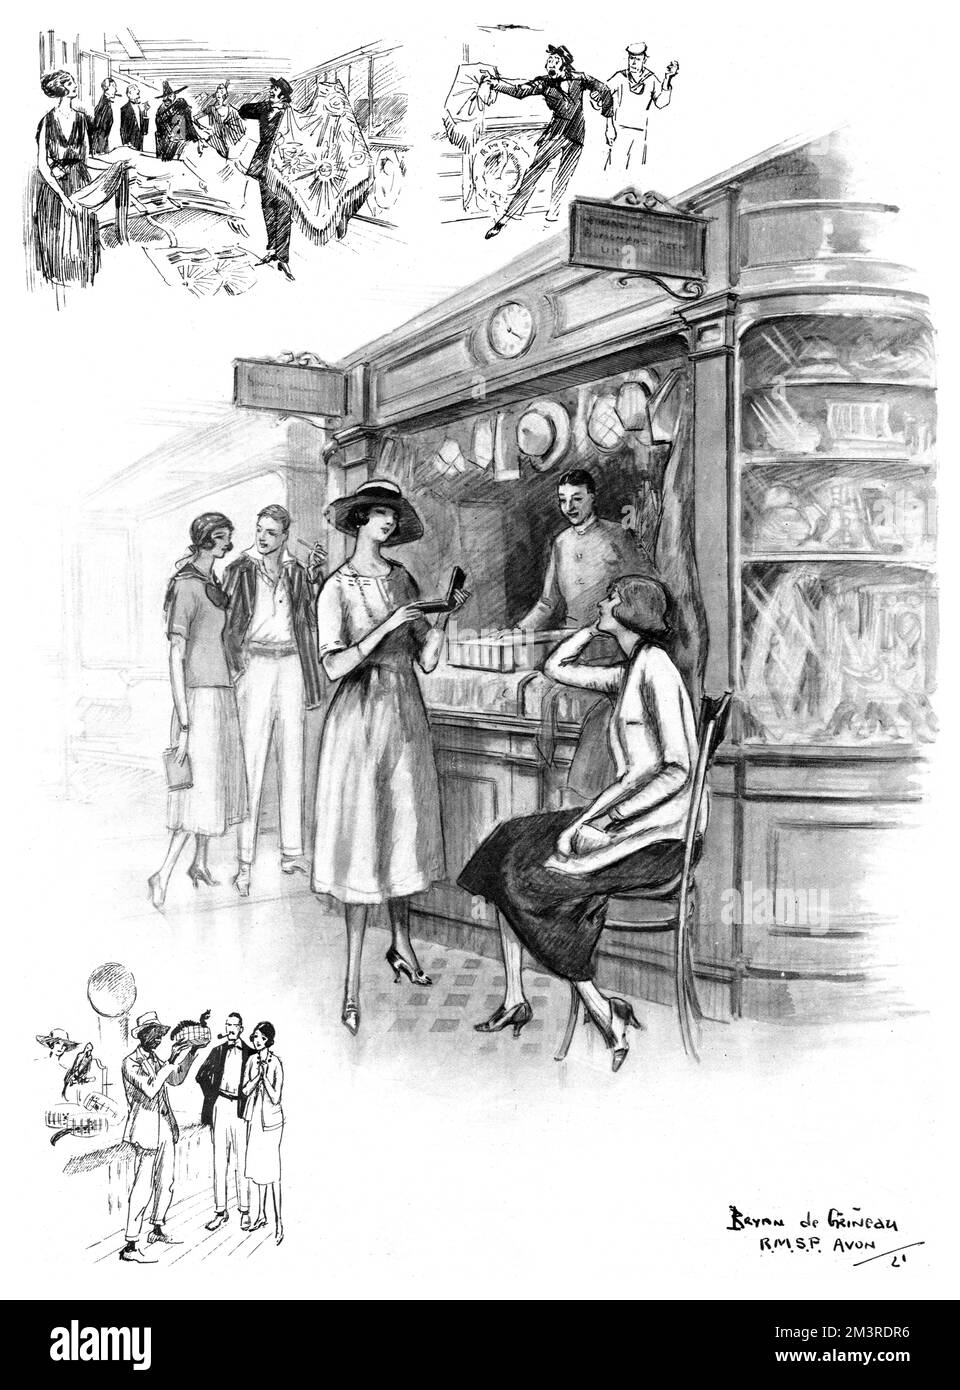 &quot;Bond Street&quot; aboard a liner: Shopping on the high seas. Woman's chief diversion still available at sea: Customers at an R.M.S.P. liner's 'magasin':; and pedlars who board the ship at Madeira and Bahia.  Scenes drawn by Bryan de Grineau showing shoppers on board a modern ocean liner in the 1920s.     Date: 1921 Stock Photo